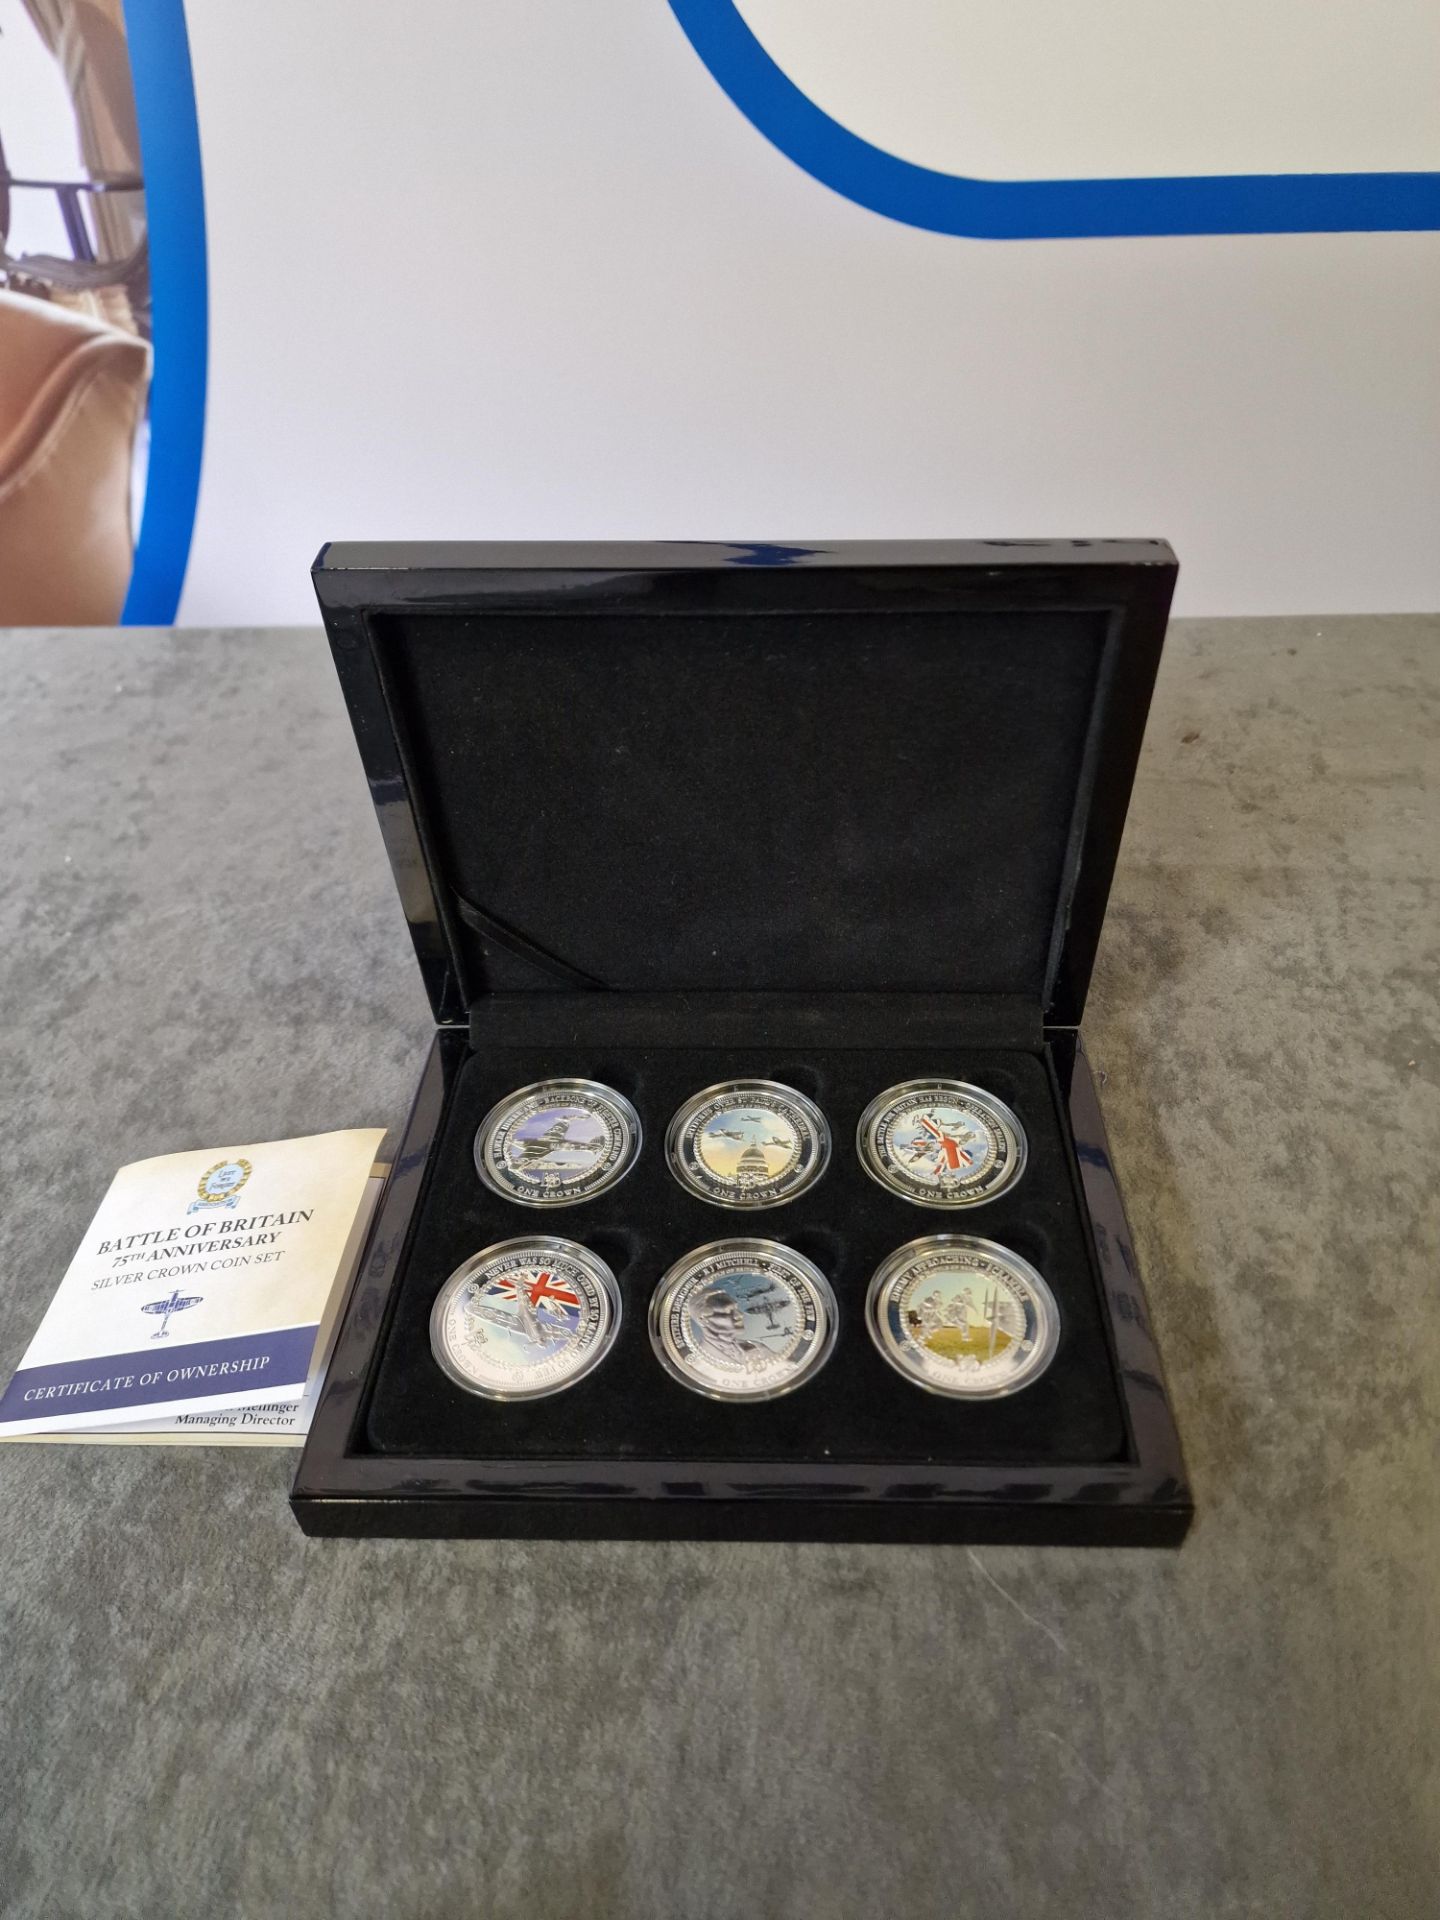 The Bradford exchange Battle of Britain 75th Anniversary silver crown coin set with certificate of